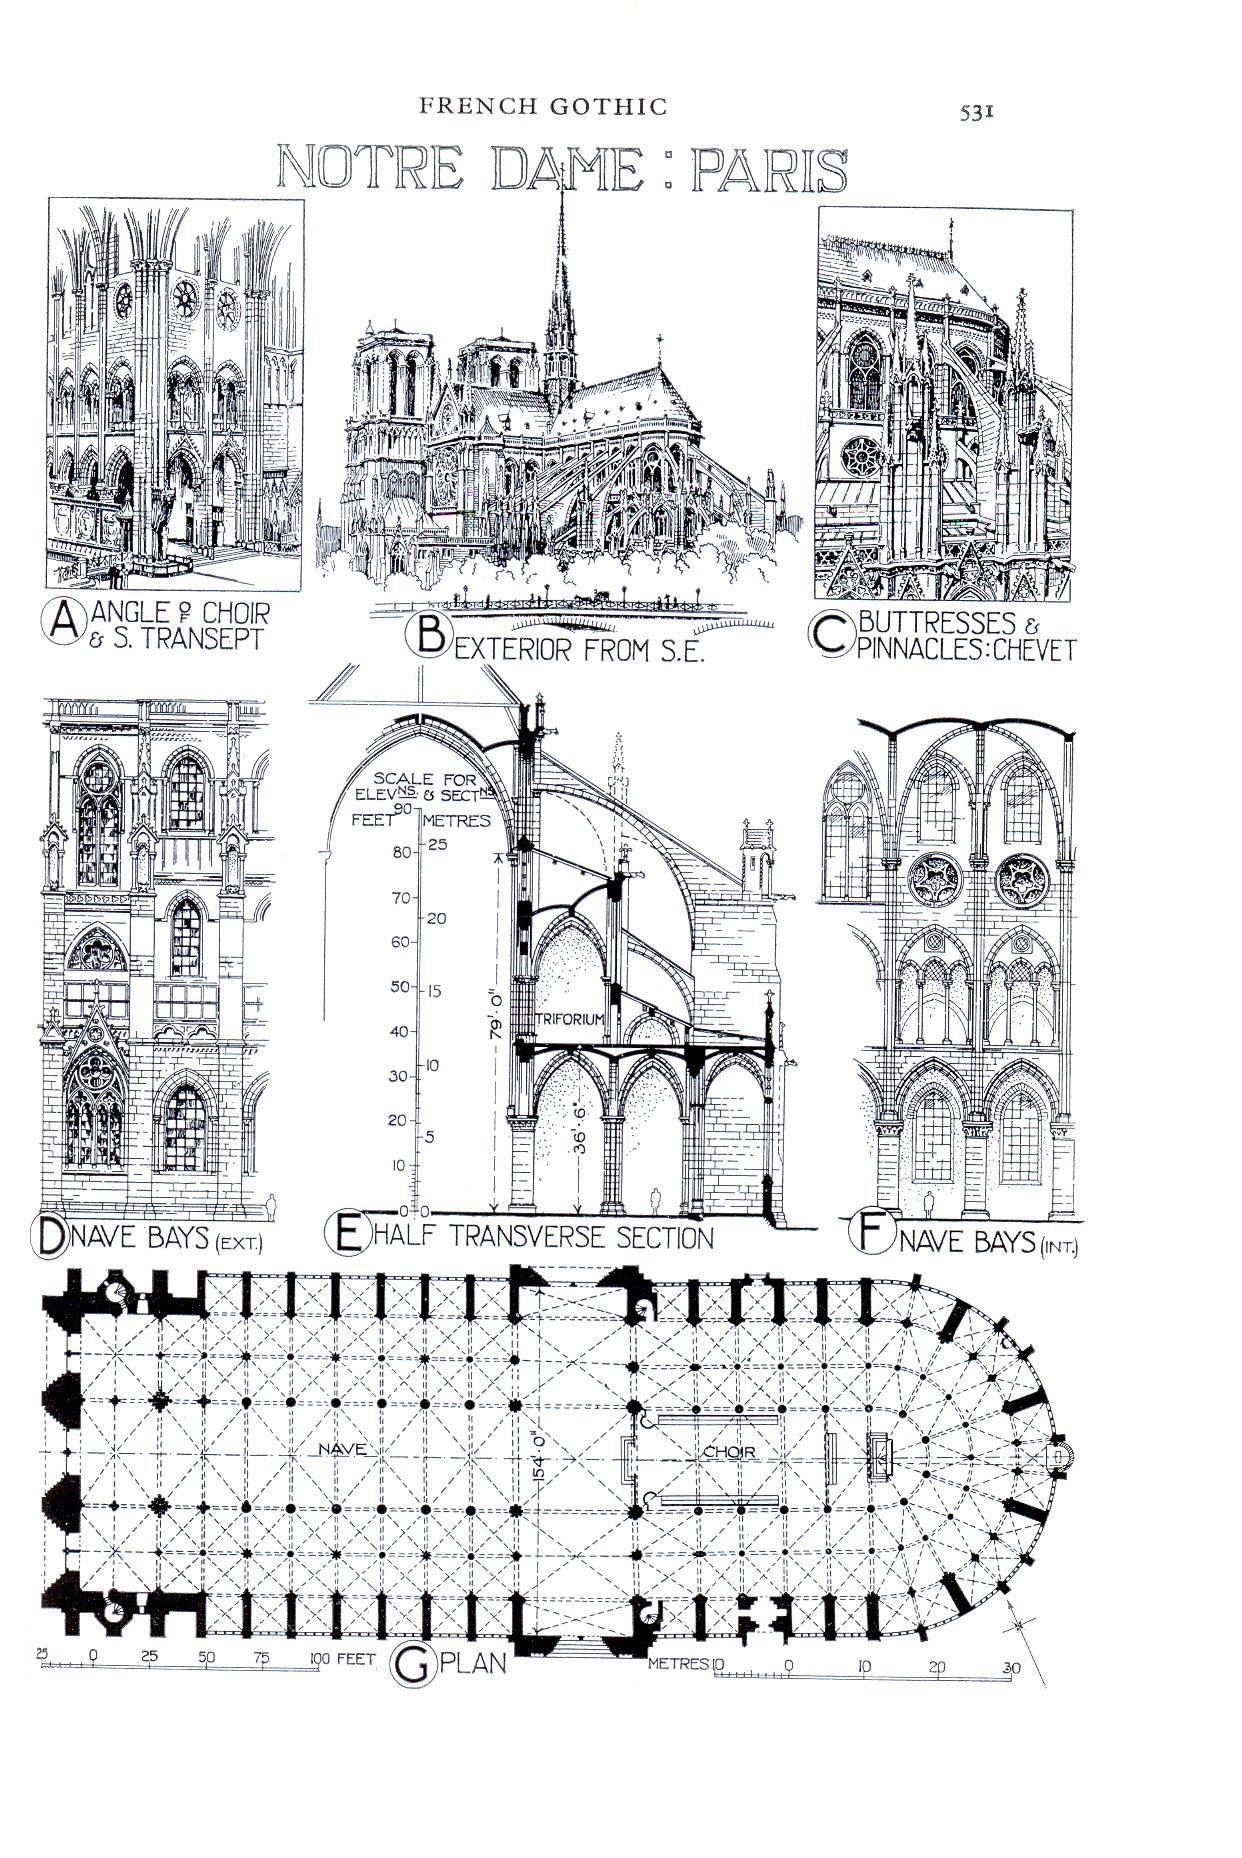 Image of notre dame drawings